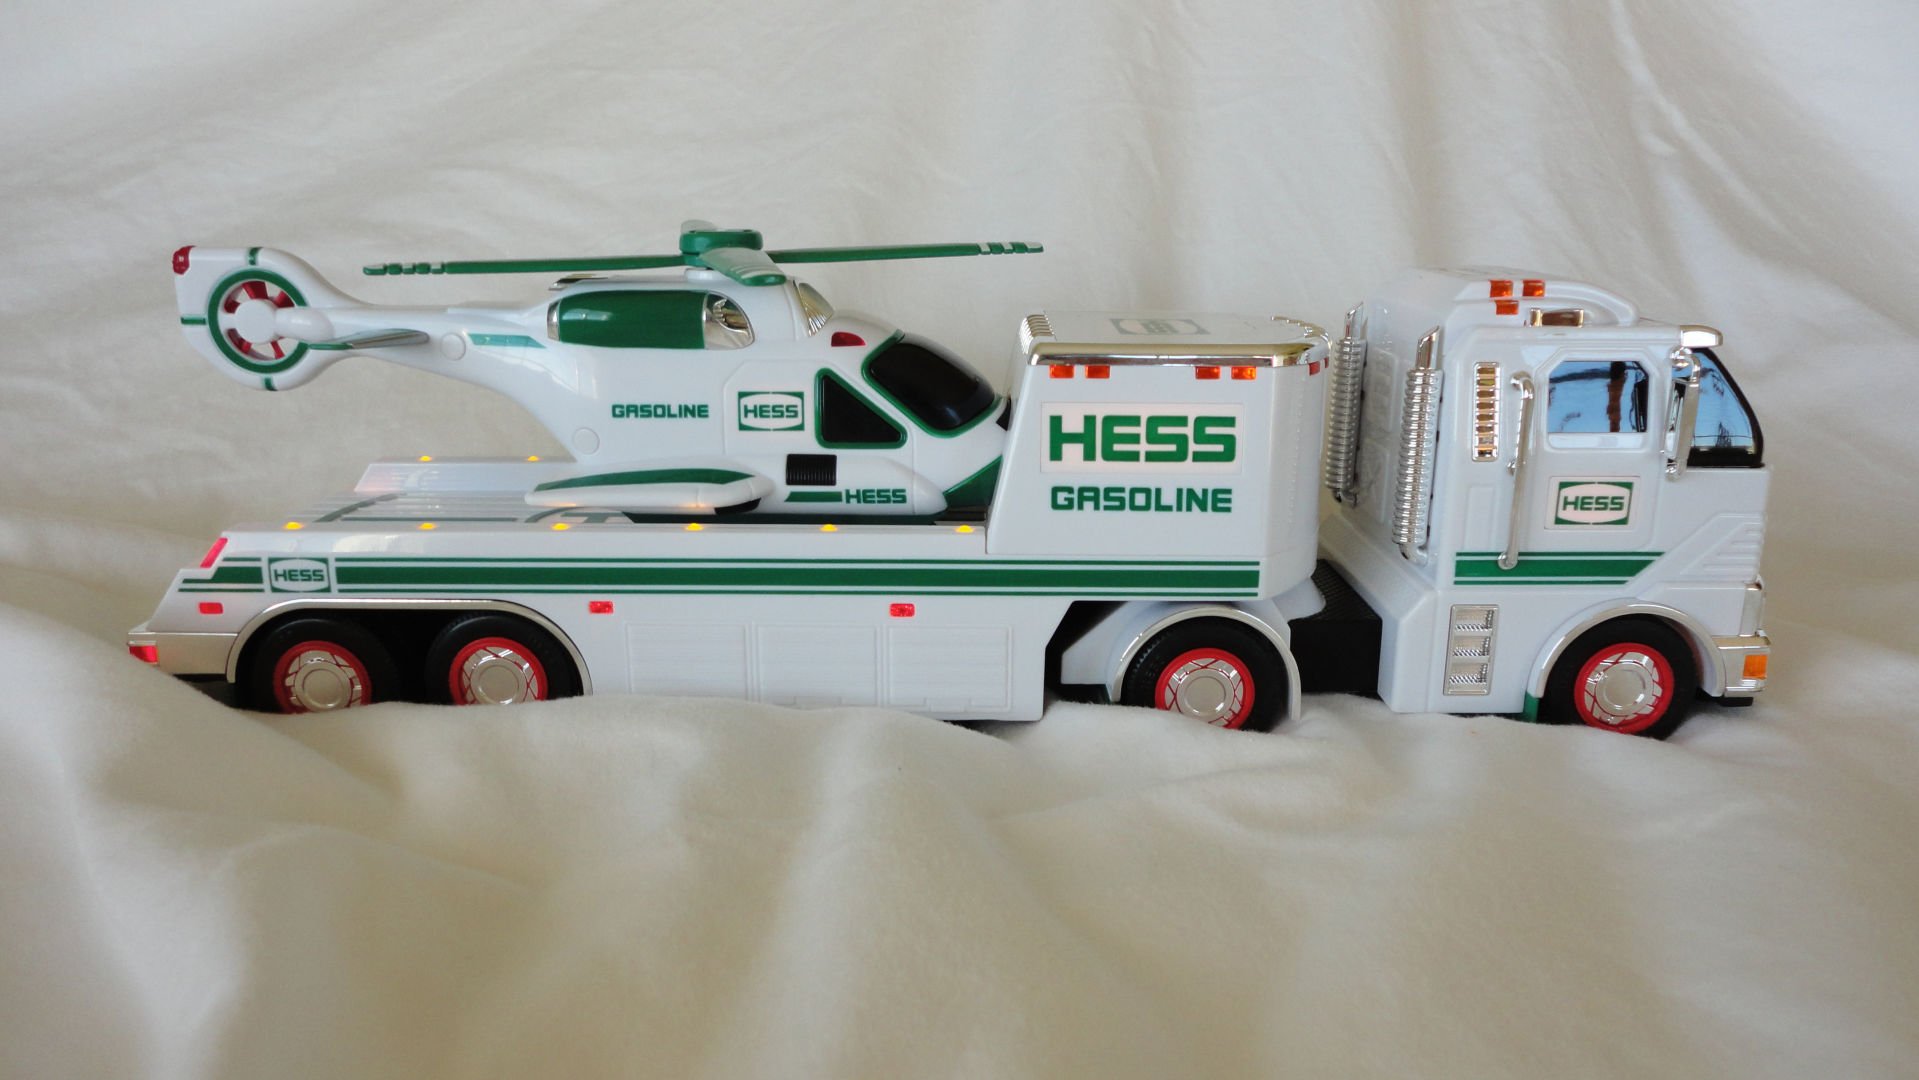 most expensive hess toy truck